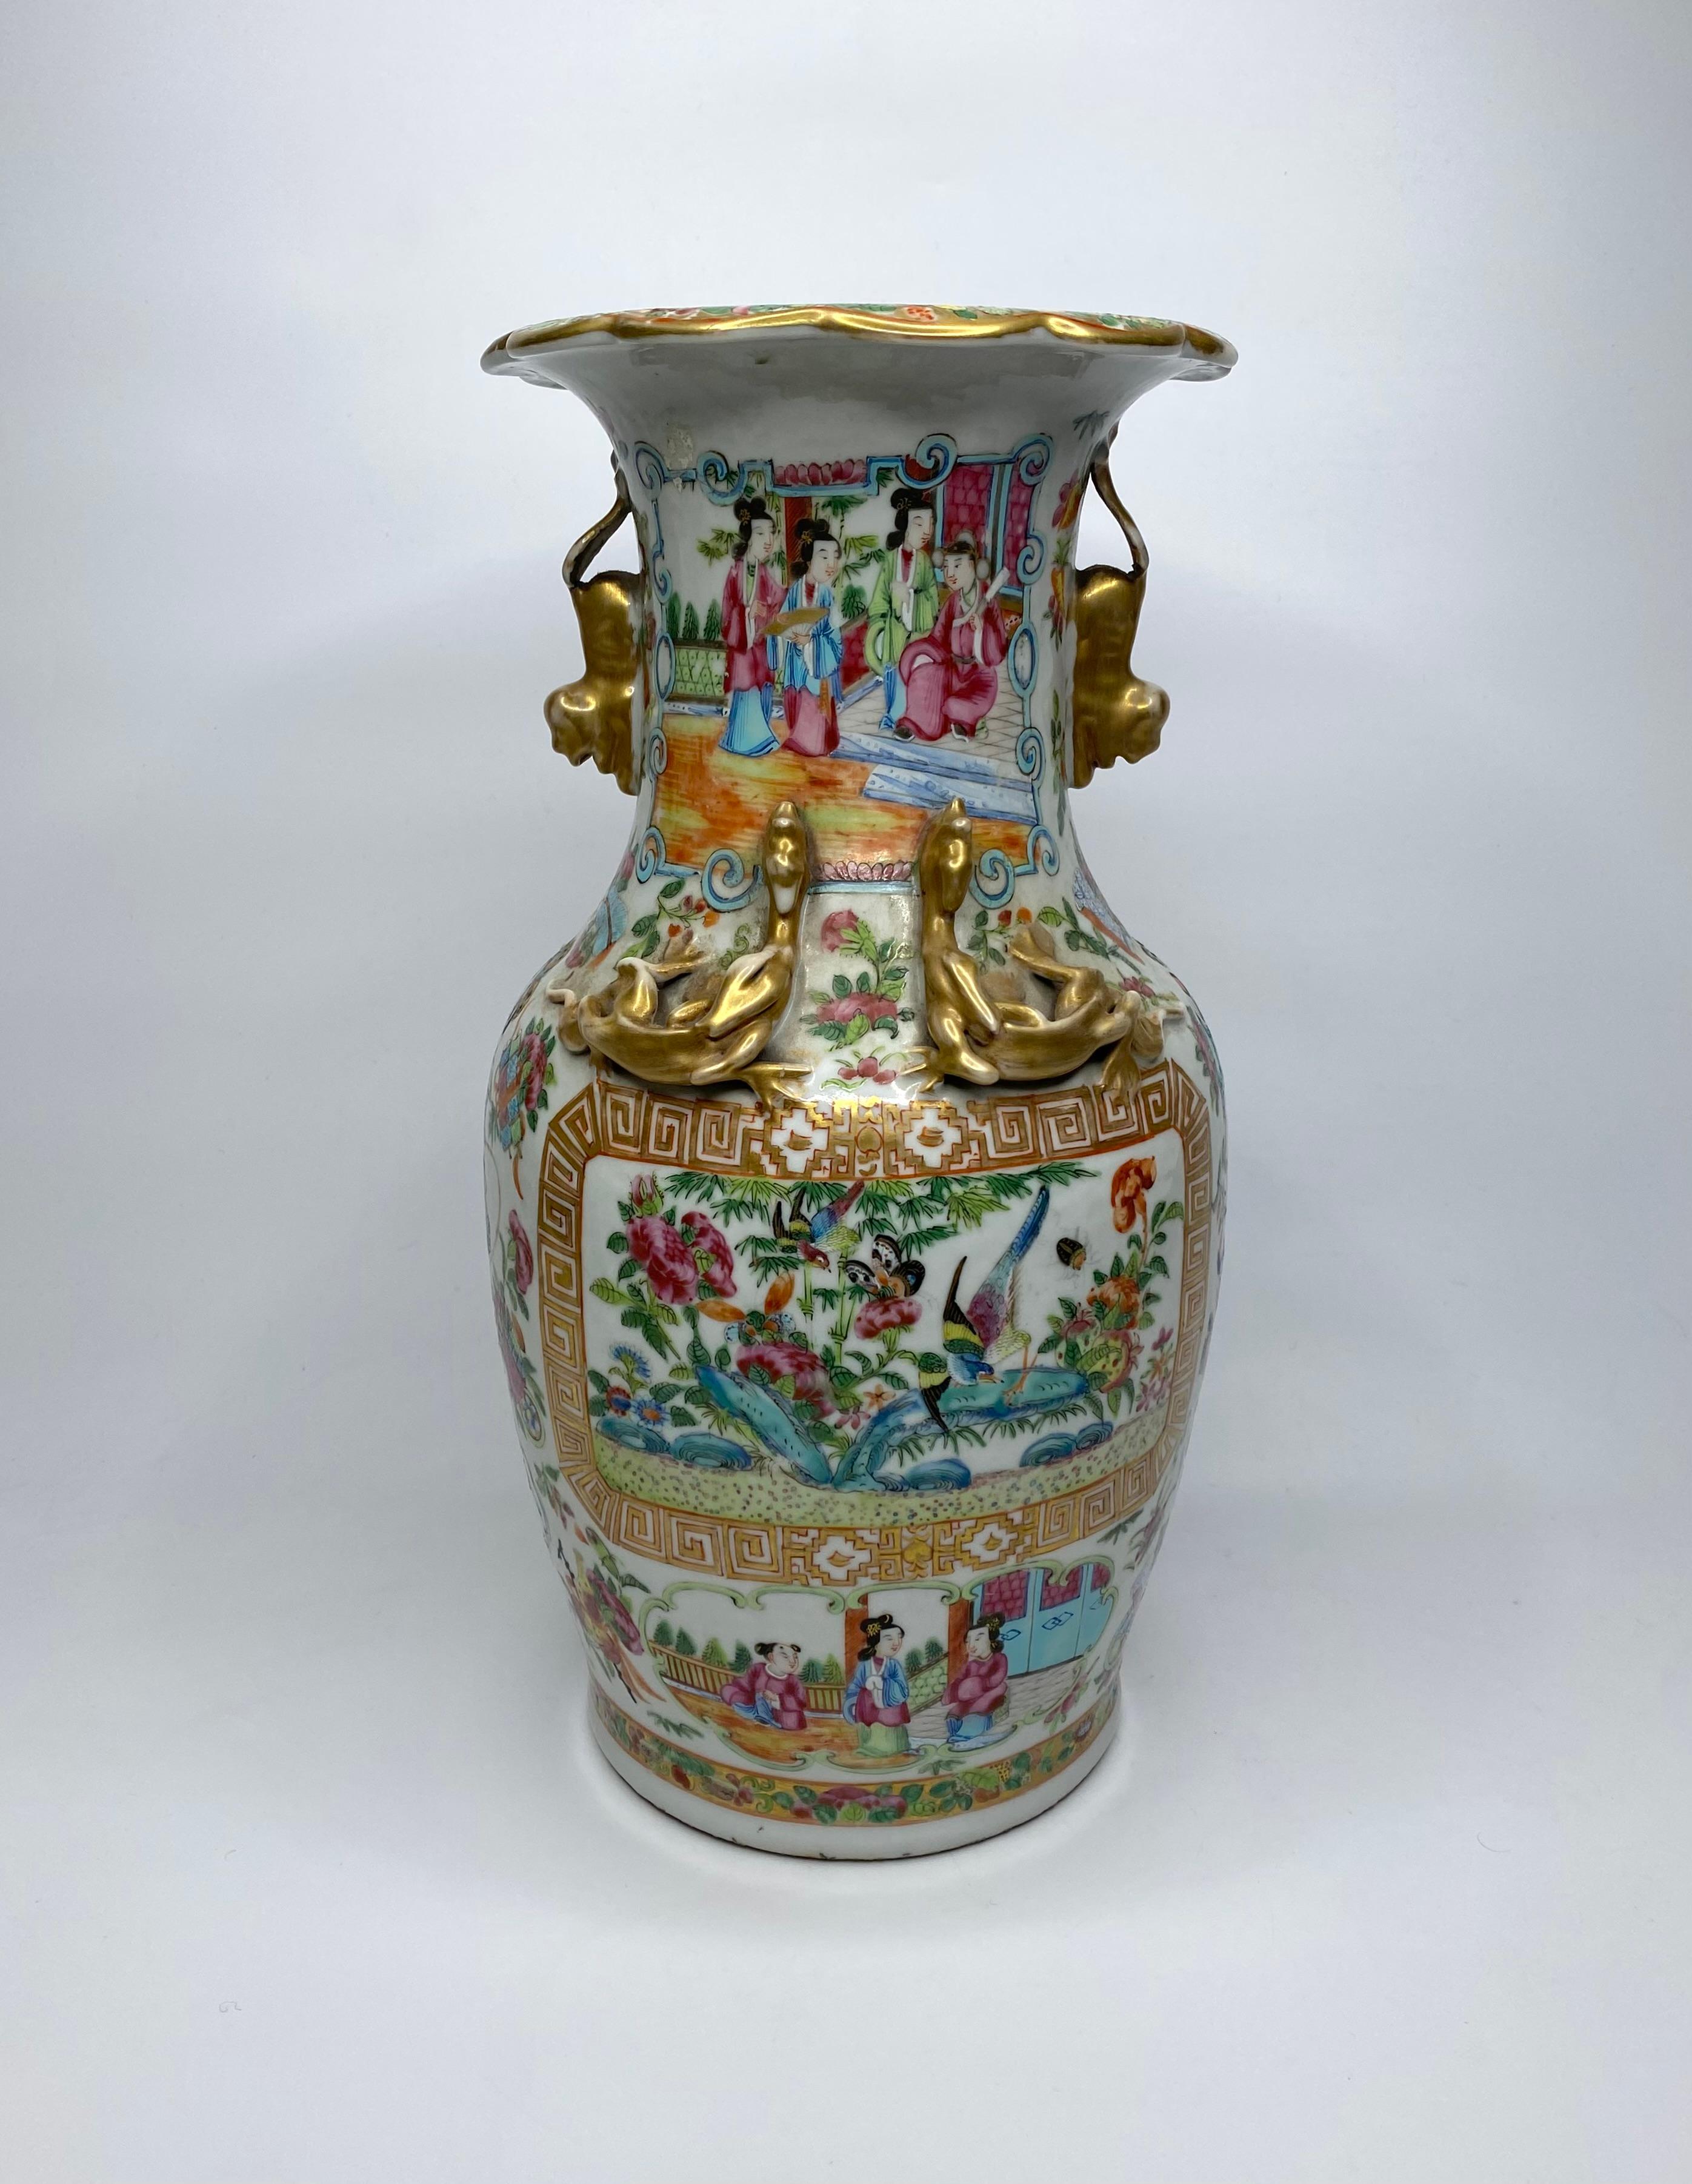 Fired Chinese Cantonese porcelain vase, c. 1870. Qing Dynasty.